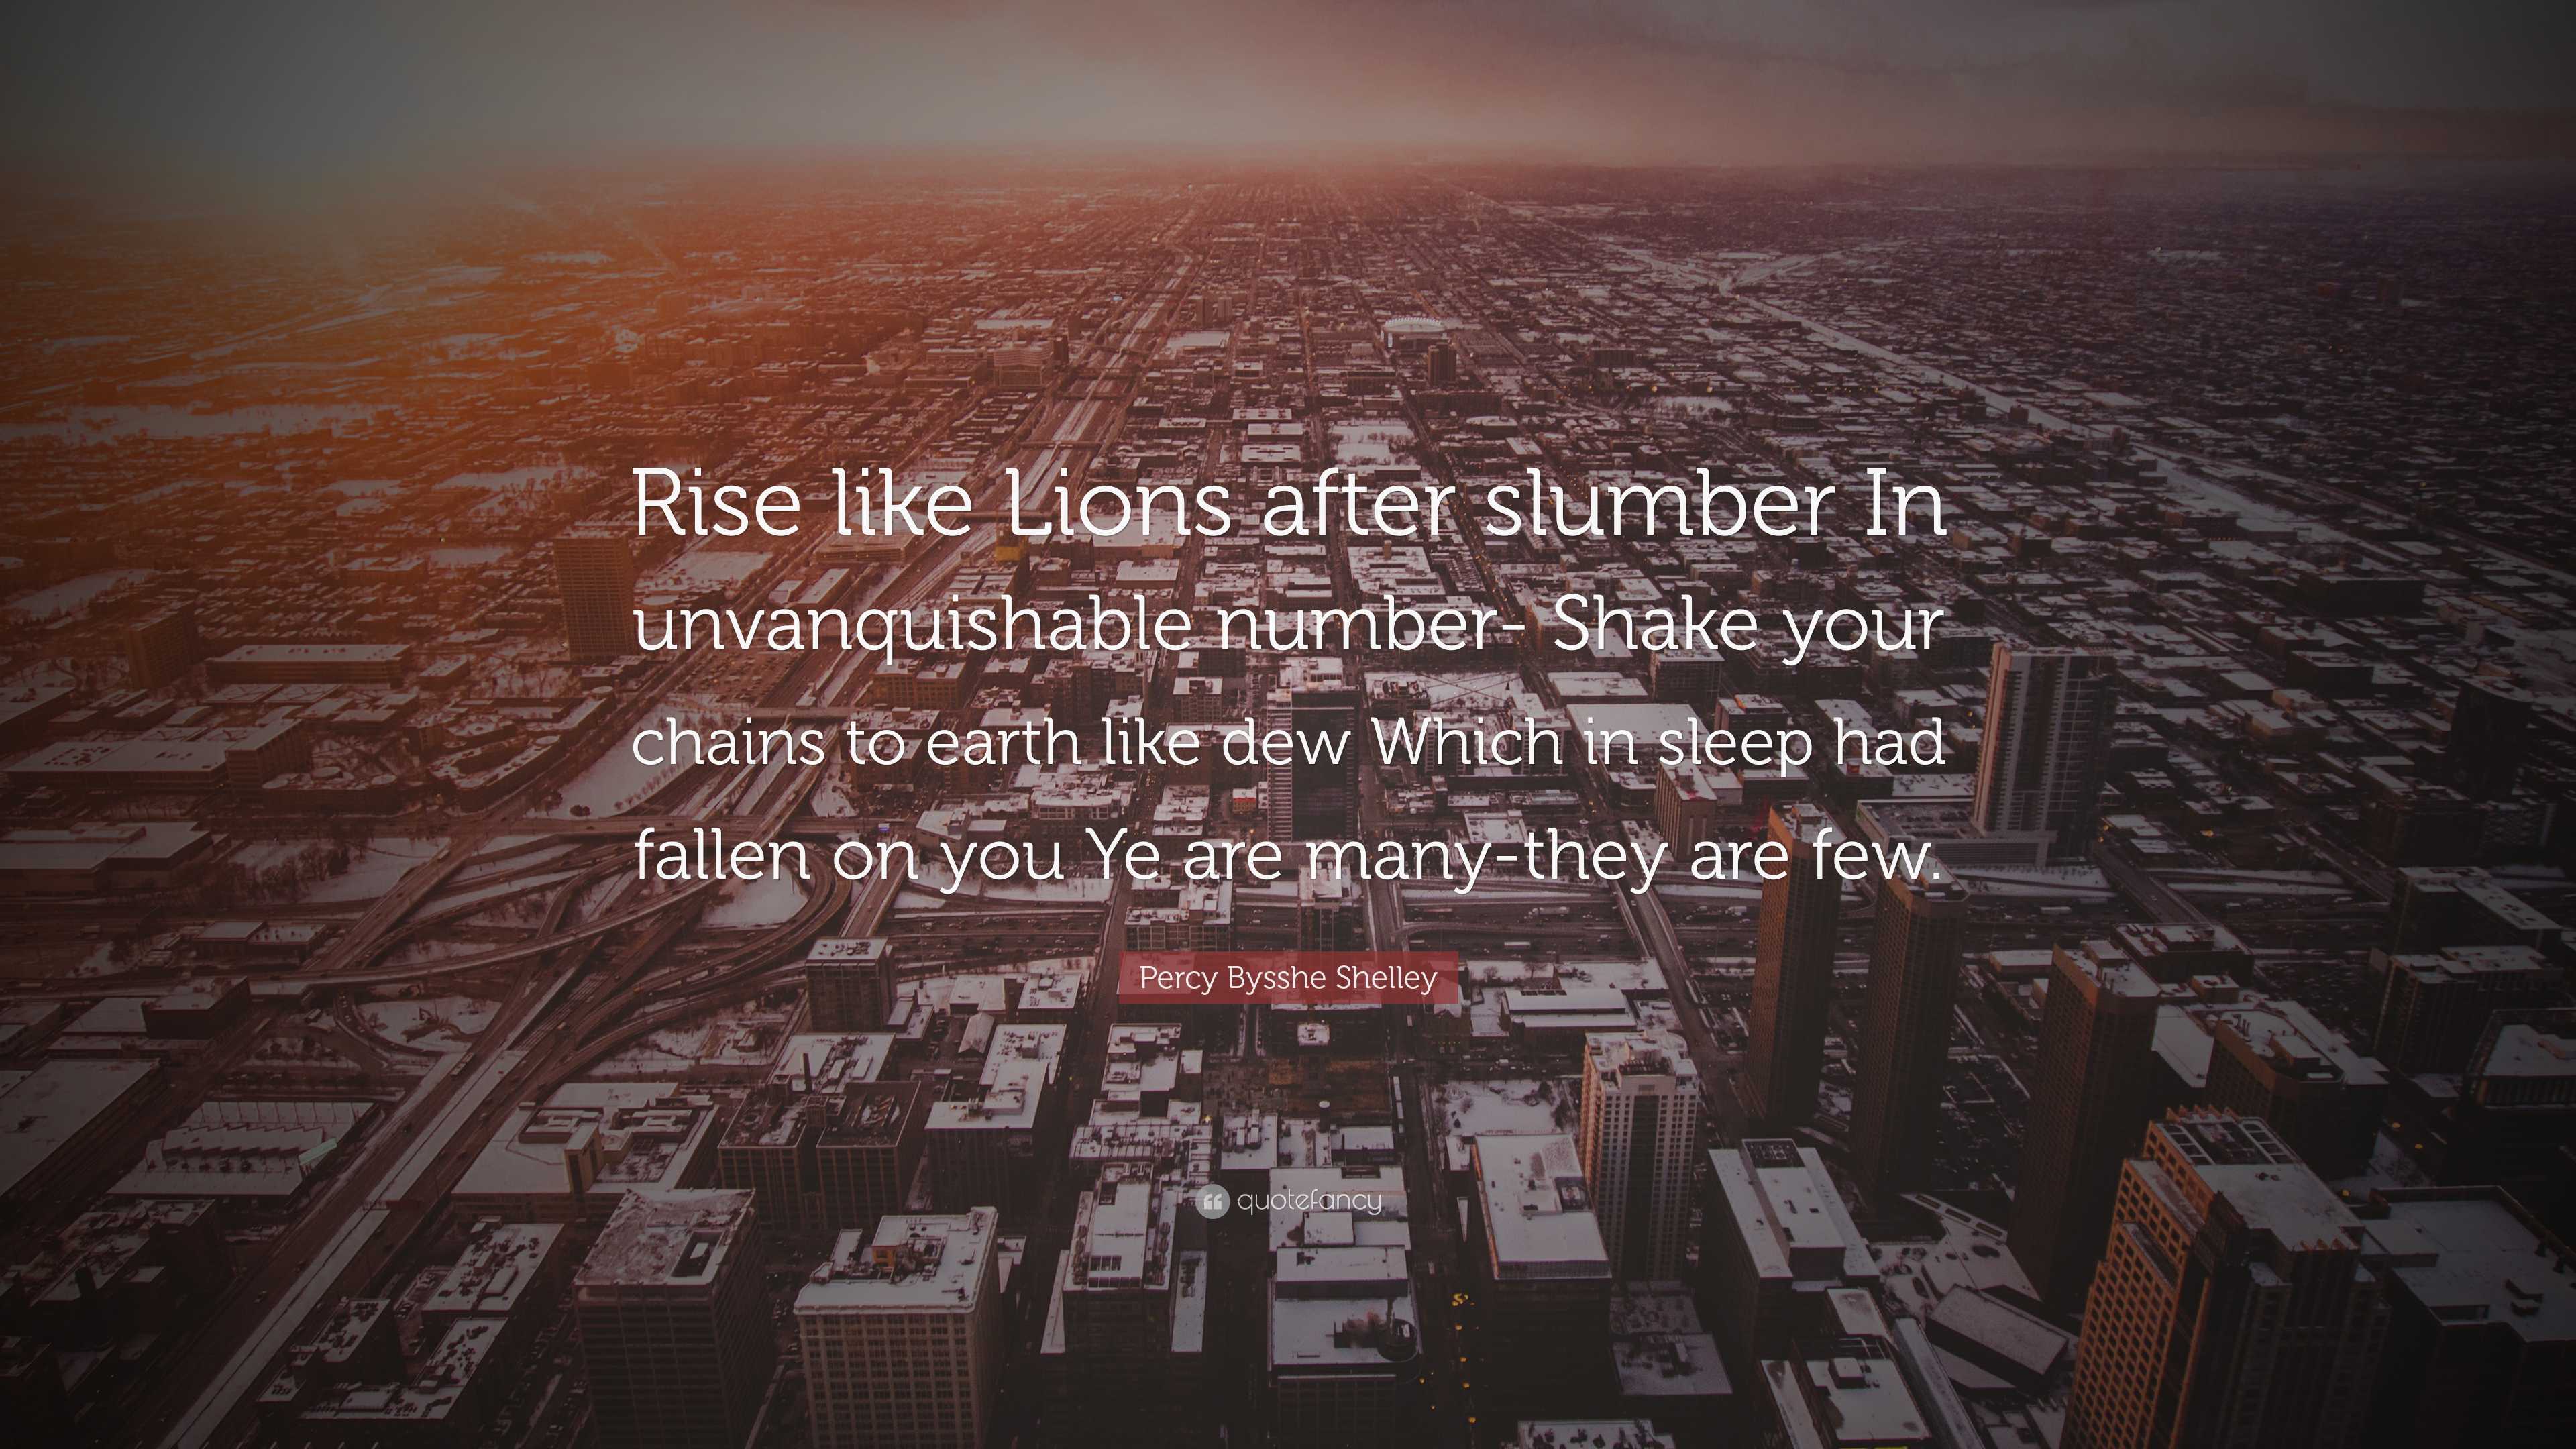 Let us rise like lions